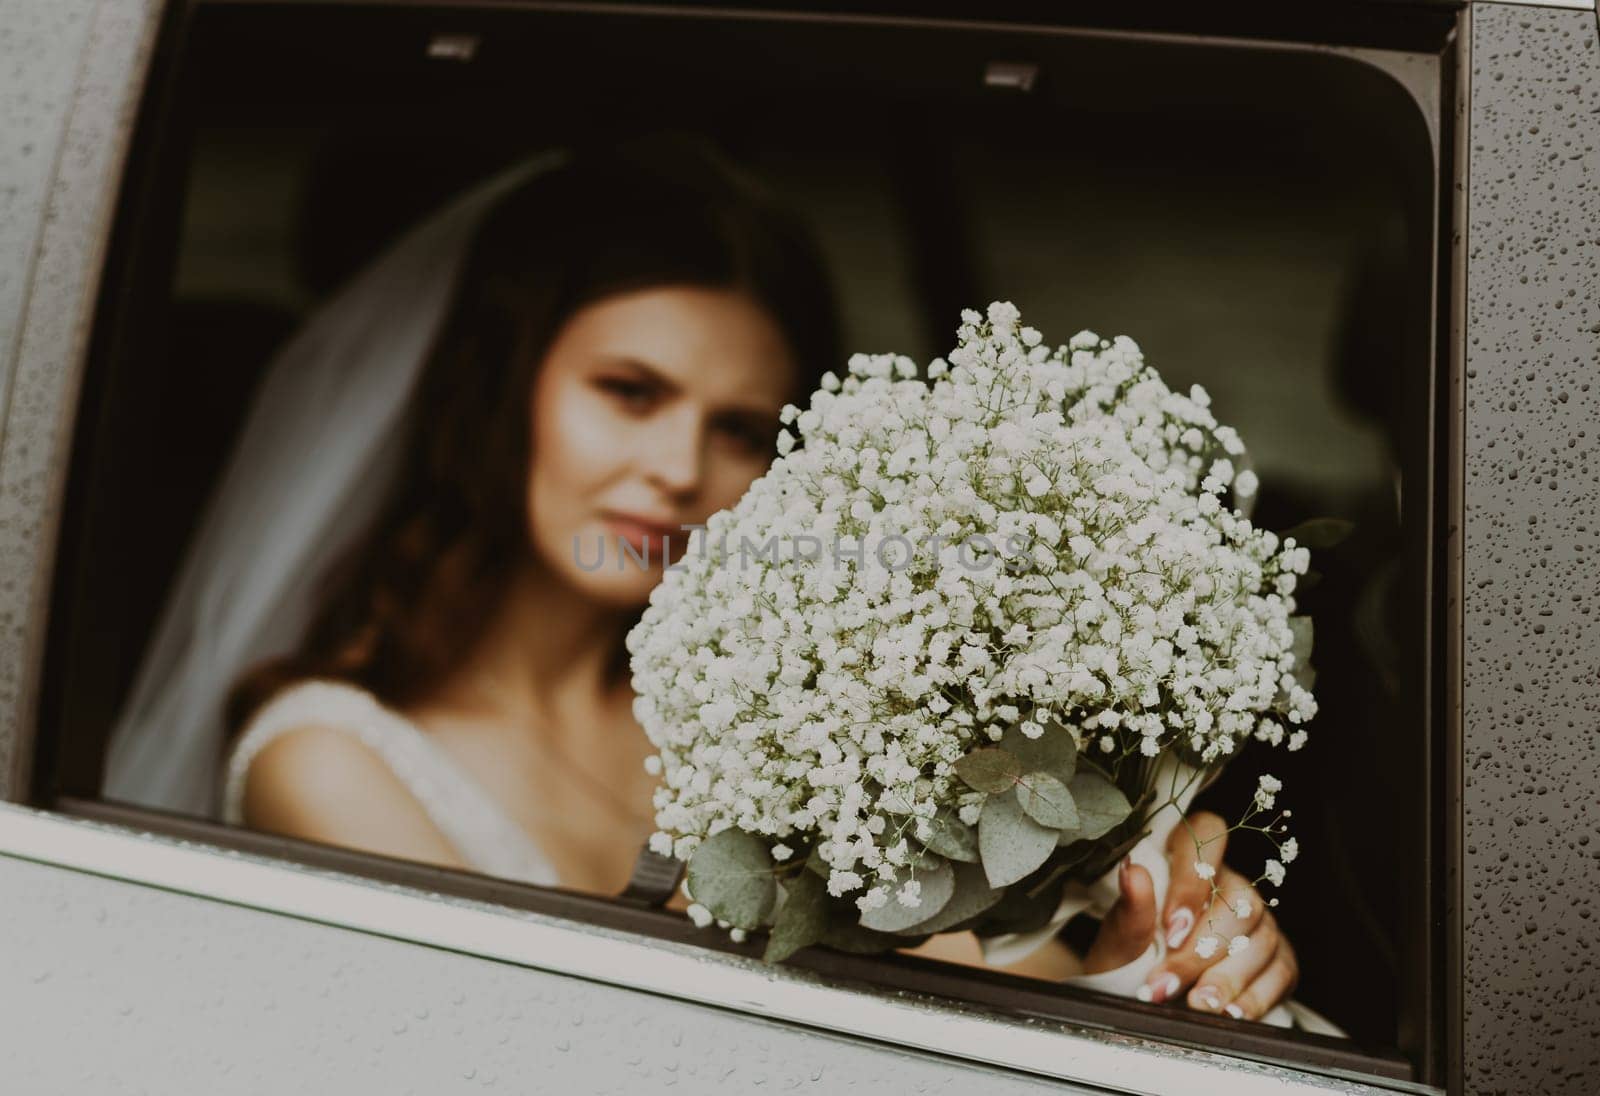 One young beautiful Caucasian bride holding out a large bouquet of white boutonnieres out the car window on a cloudy rainy day, close-up side view with selective focus and depth of field.